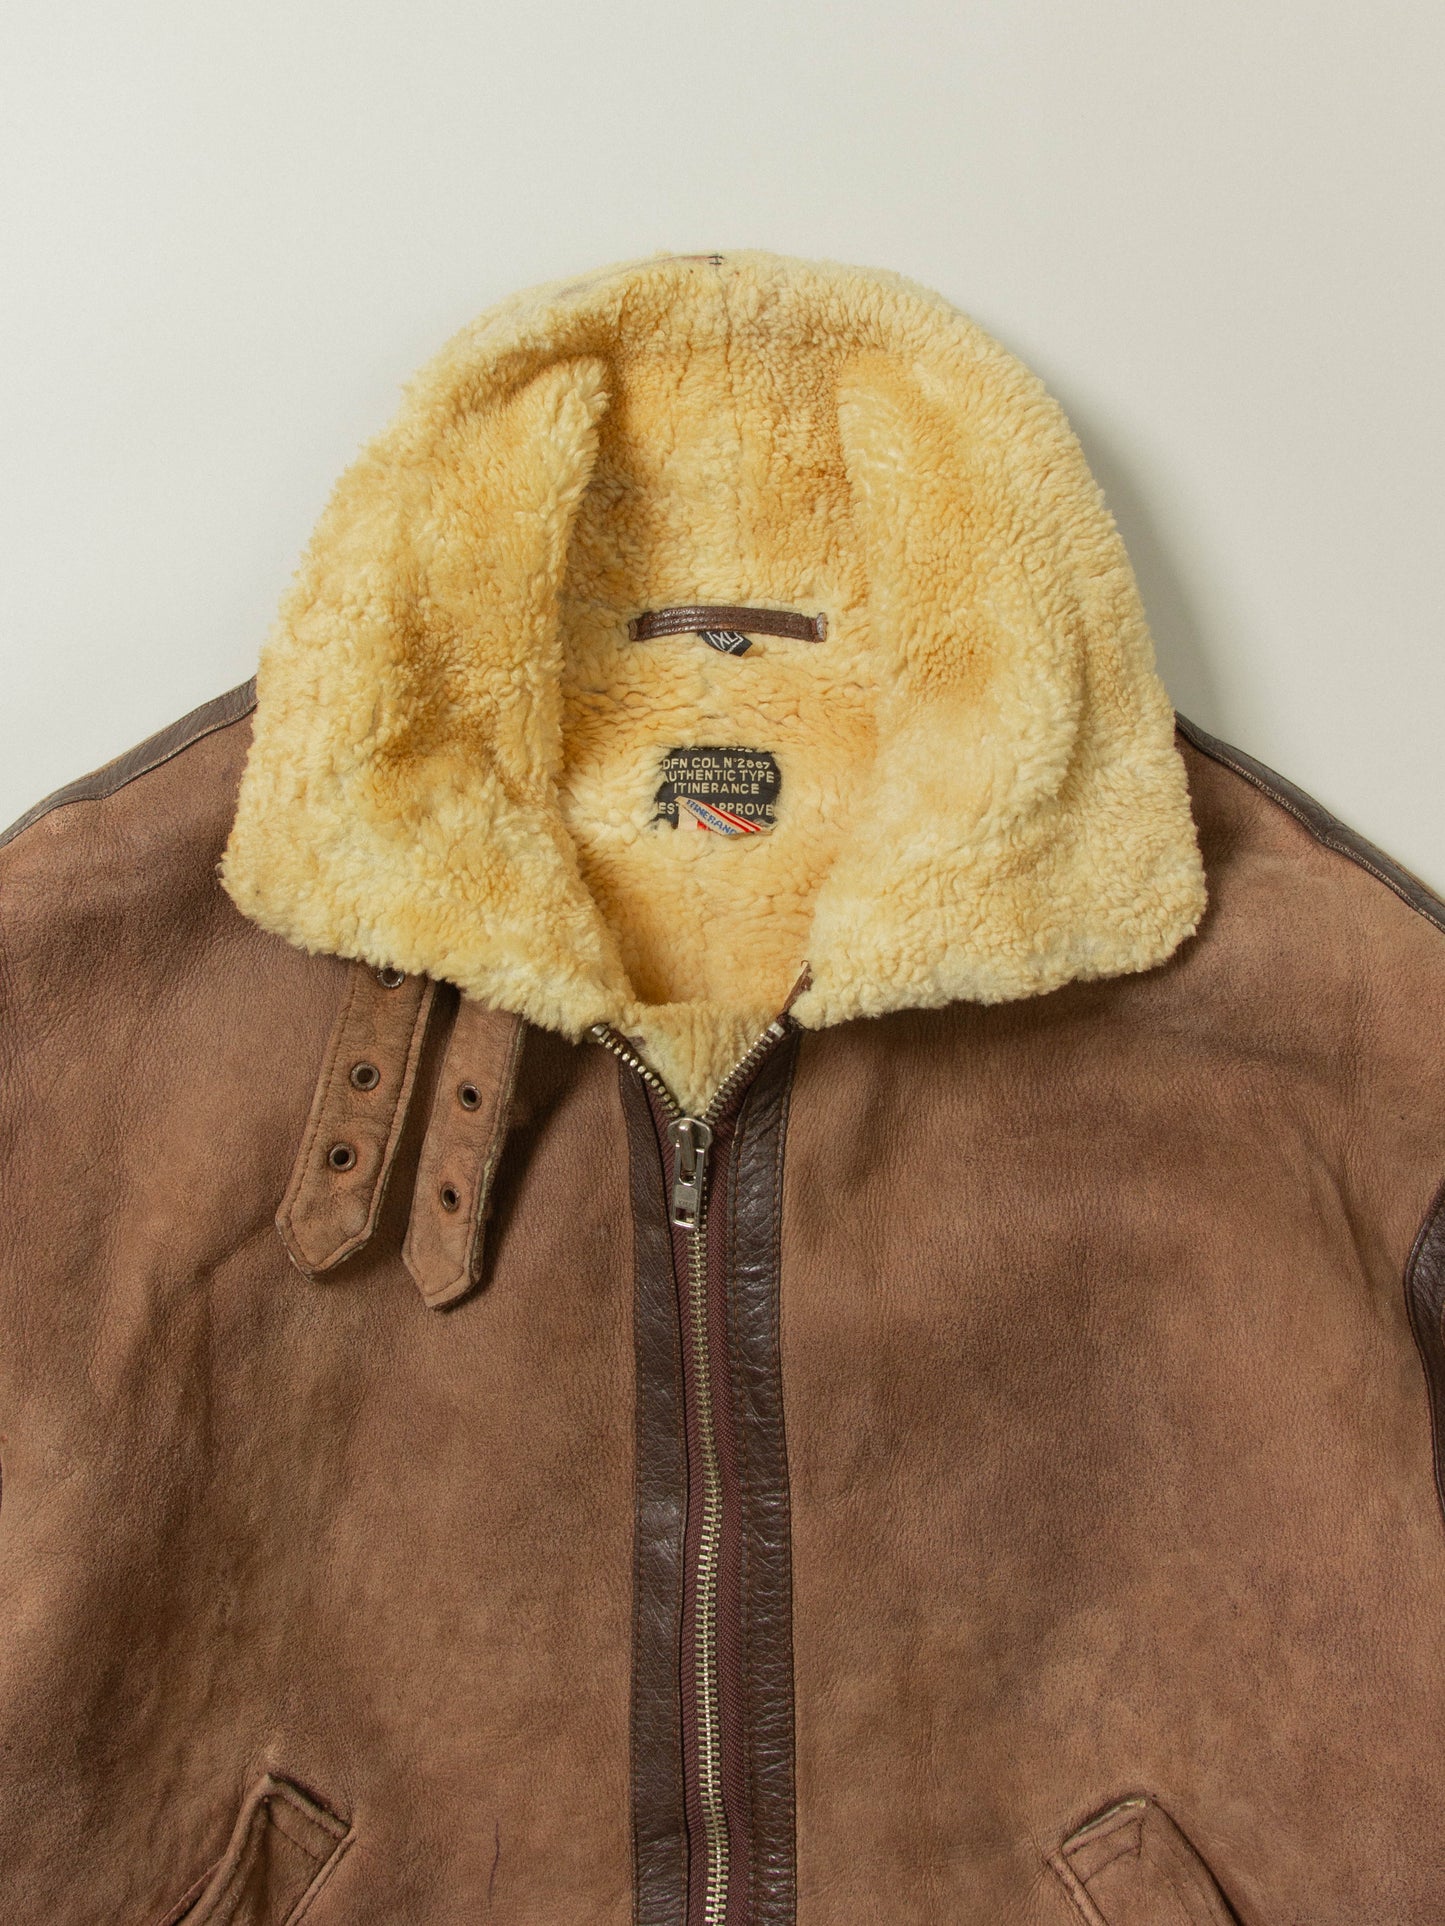 Vtg Itinerance B-3 Shearling Jacket - Made in France (L)